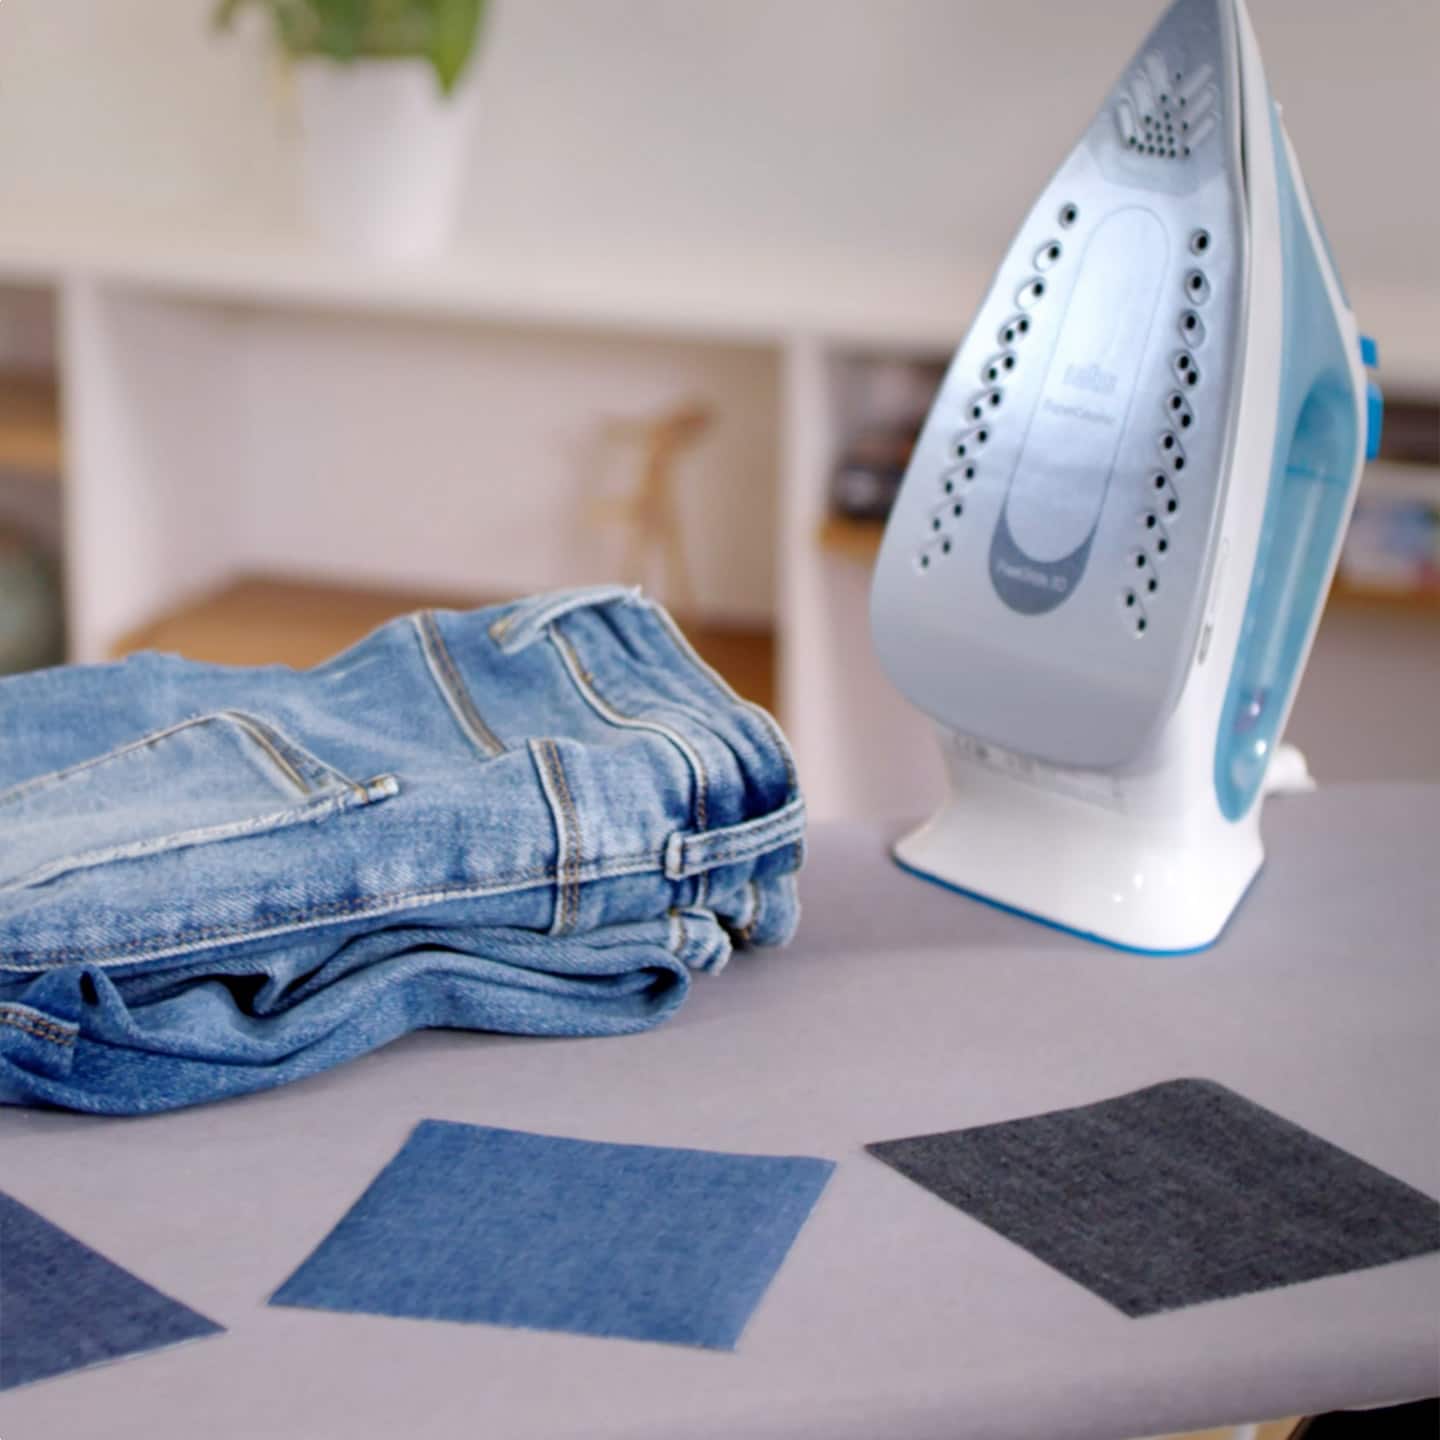 A pair of jeans neatly folded on a table next to an iron